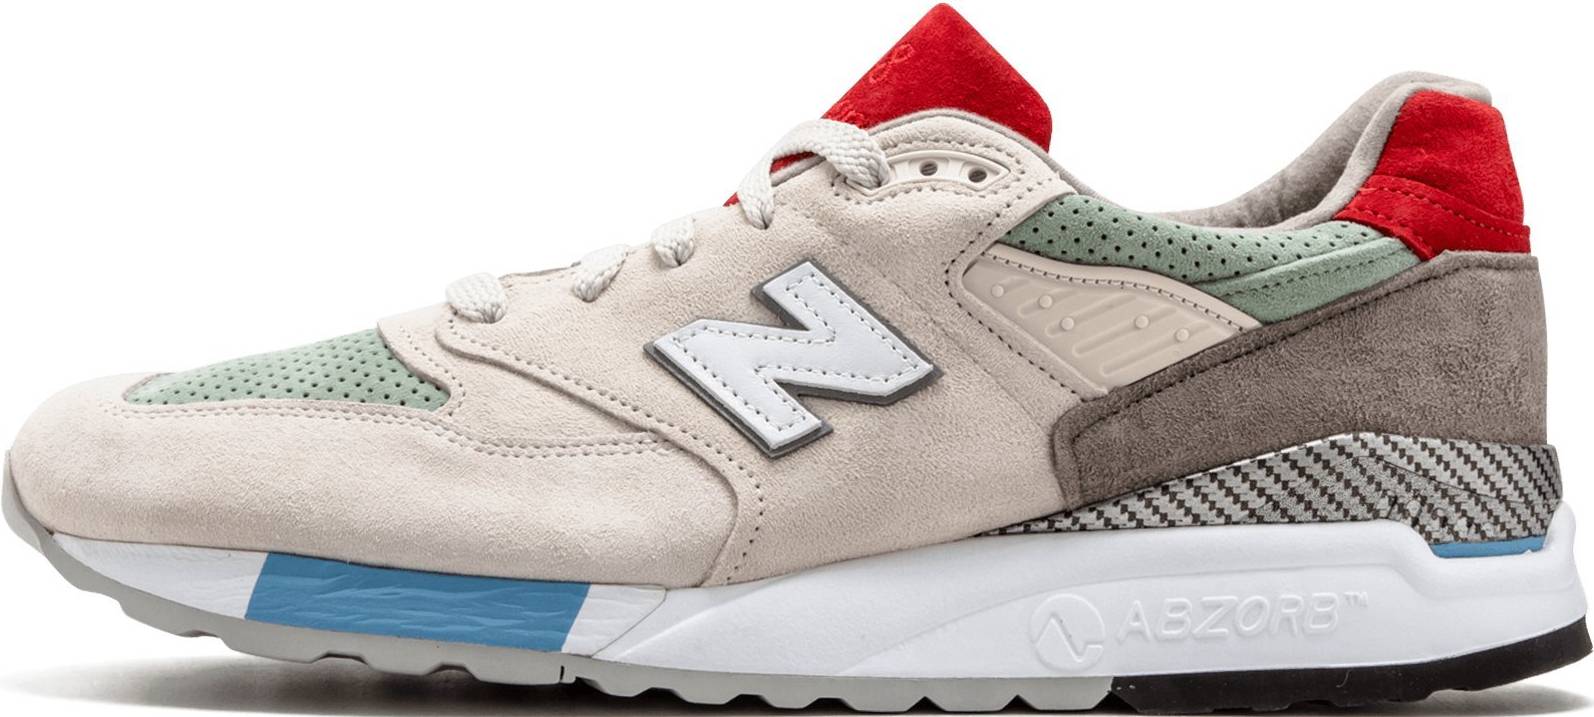 10+ New Balance Abzorb sneakers: Save up to 51% | RunRepeat جتني